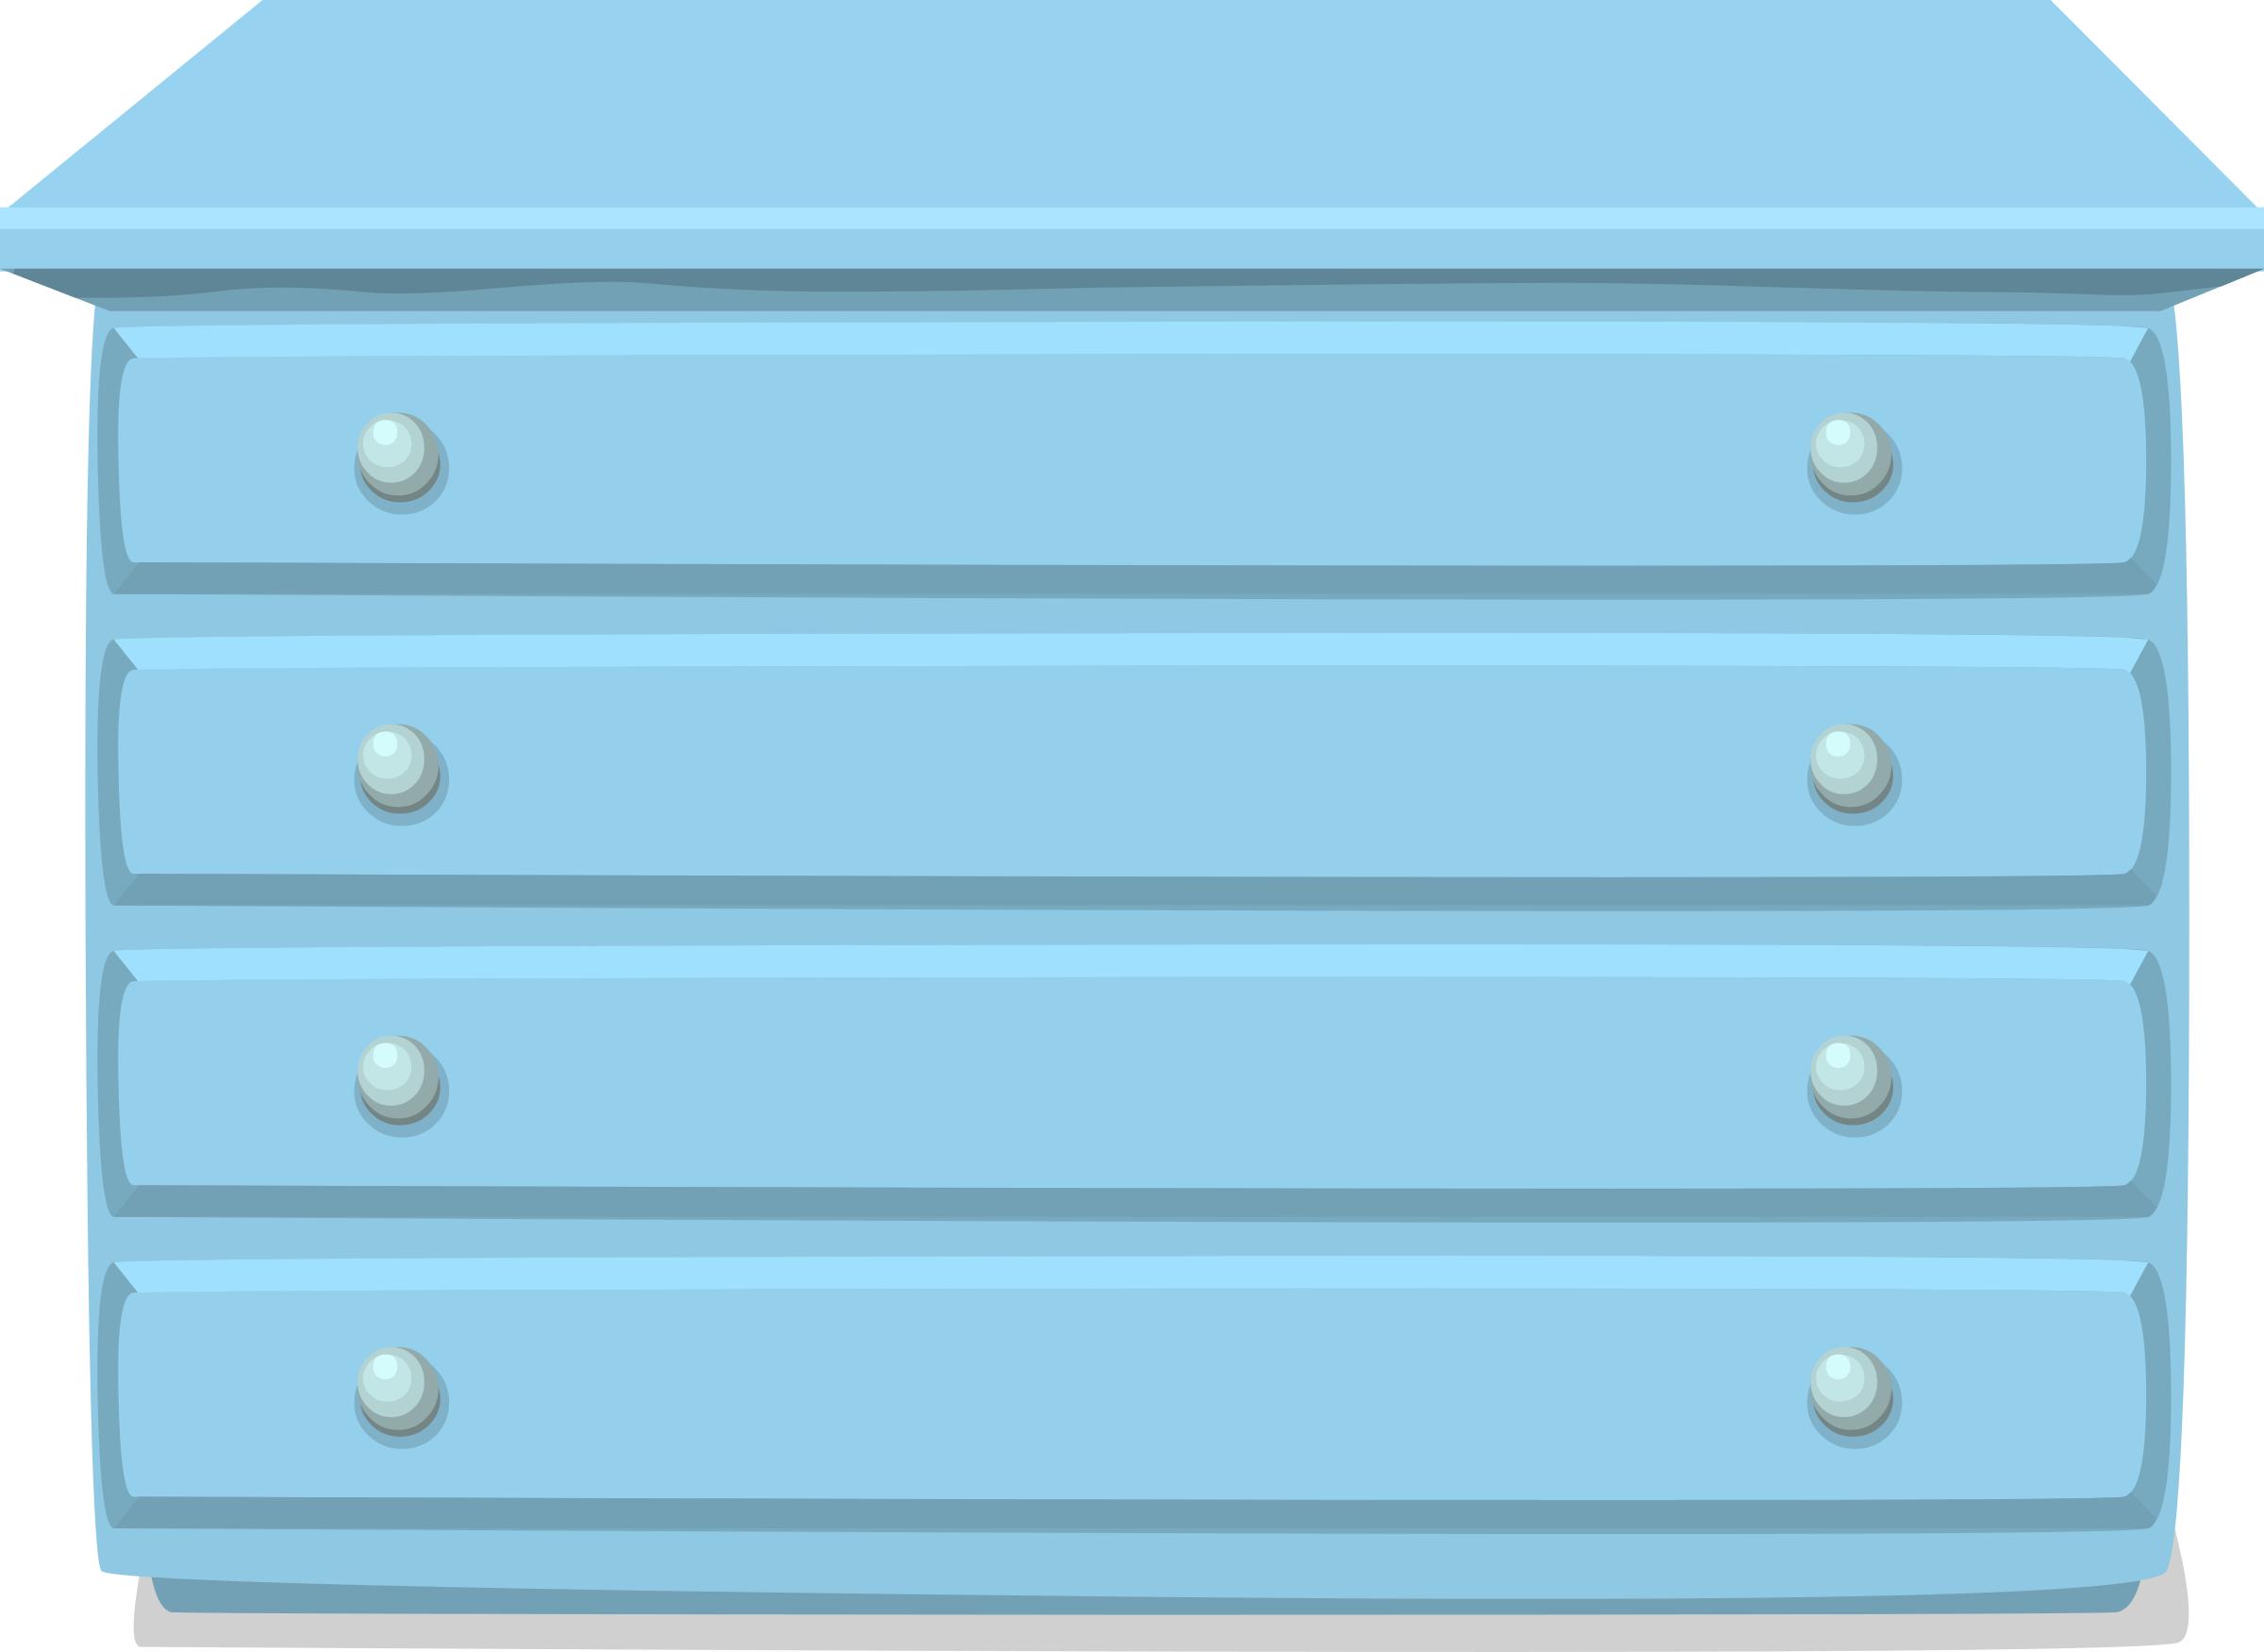 Chest of drawers from Glitch png